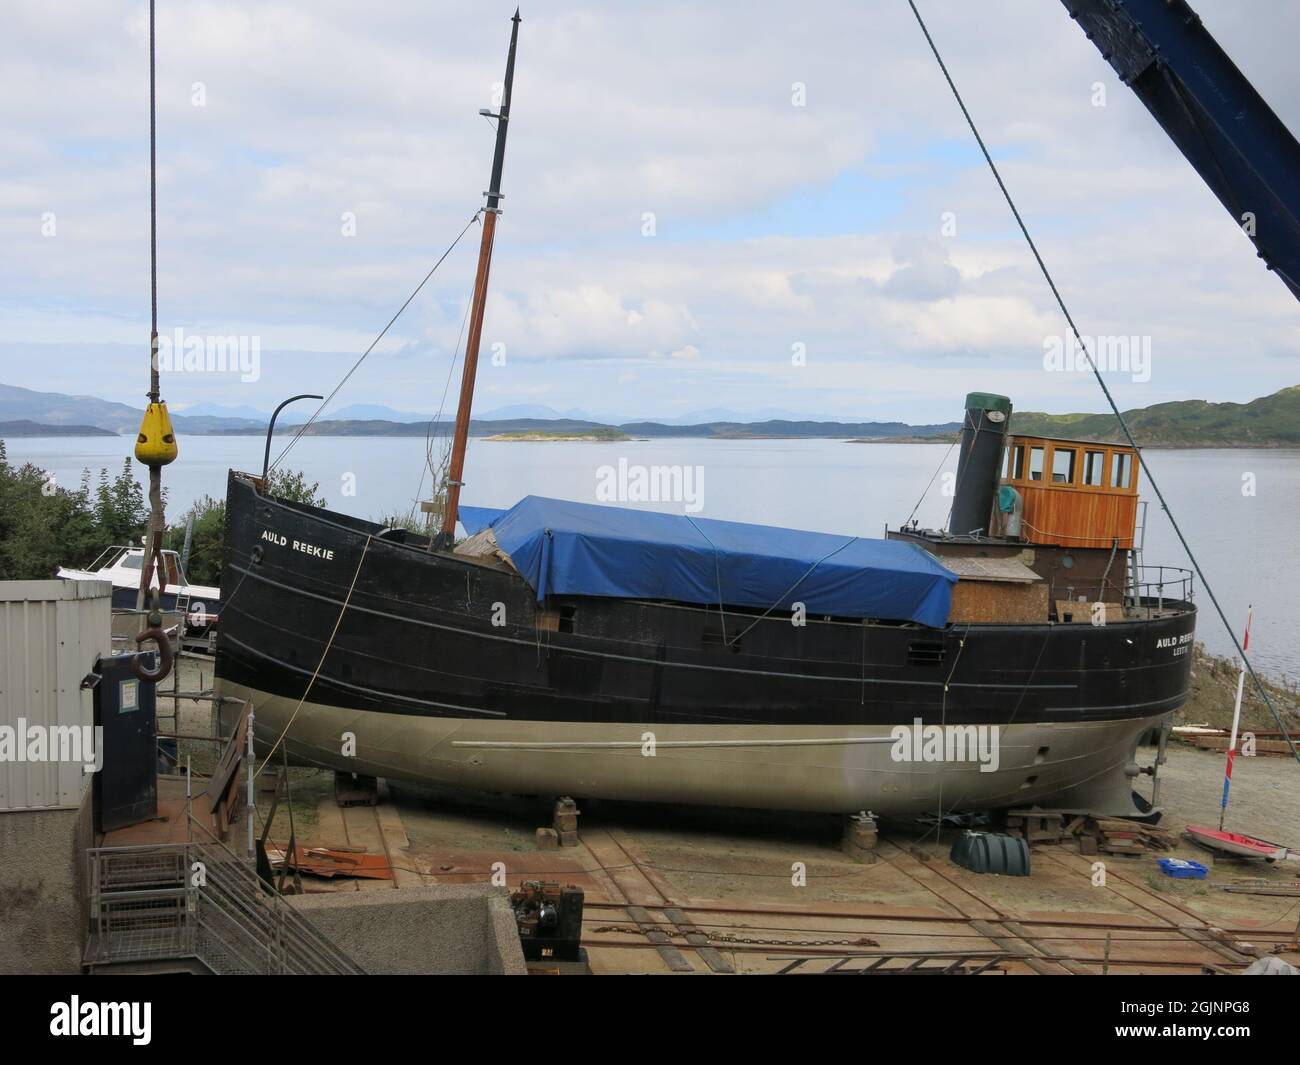 View of Auld Reekie, VIC 27, on the slipway at Crinan Boatyard where she's being restored to her former glory as a 66ft long Clyde steam puffer. Stock Photo